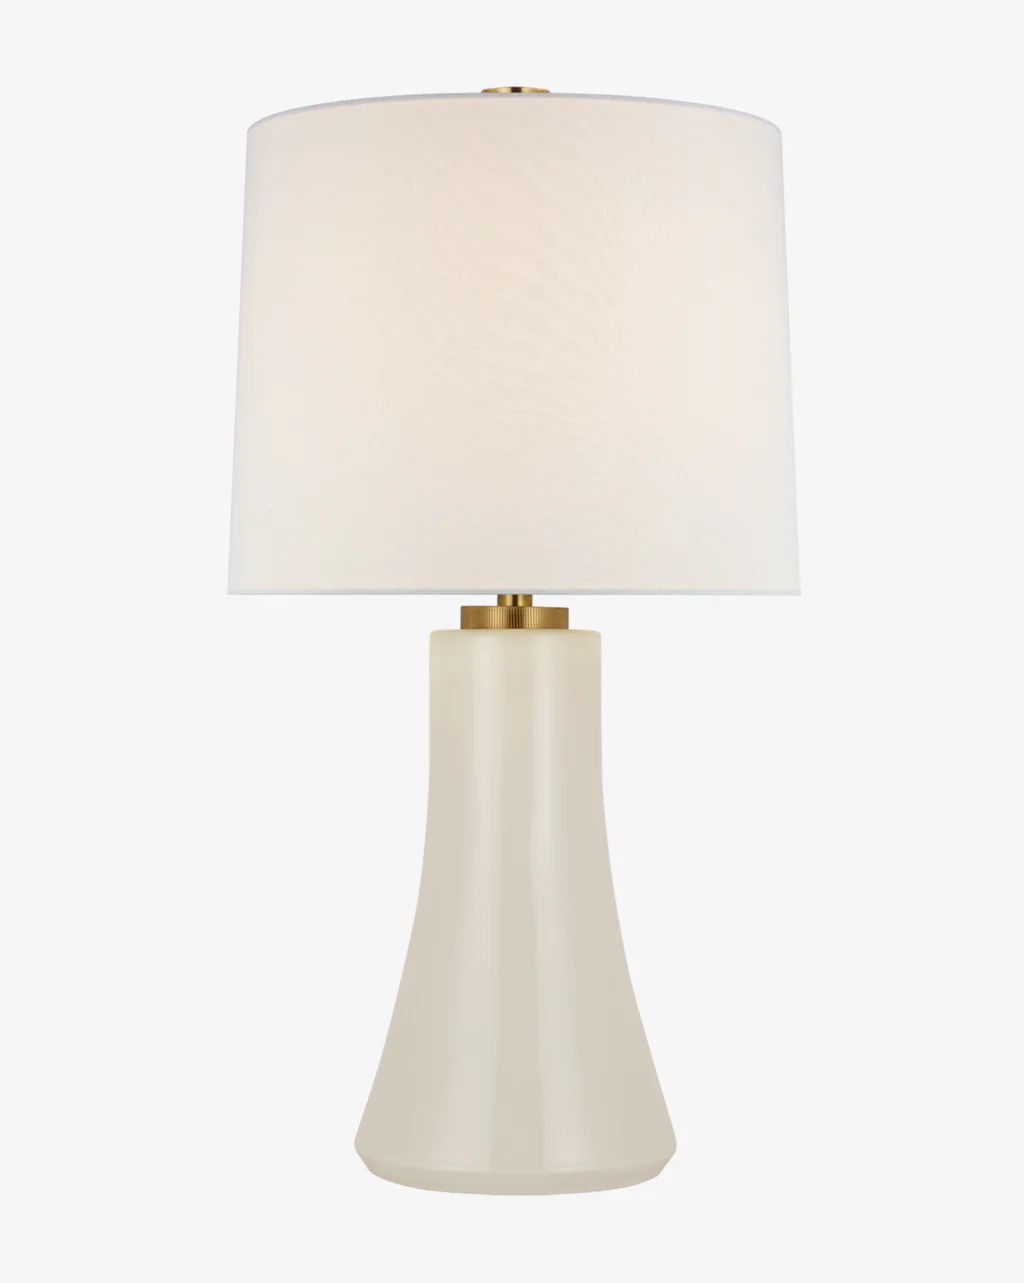 Harvest Table Lamp | McGee & Co.